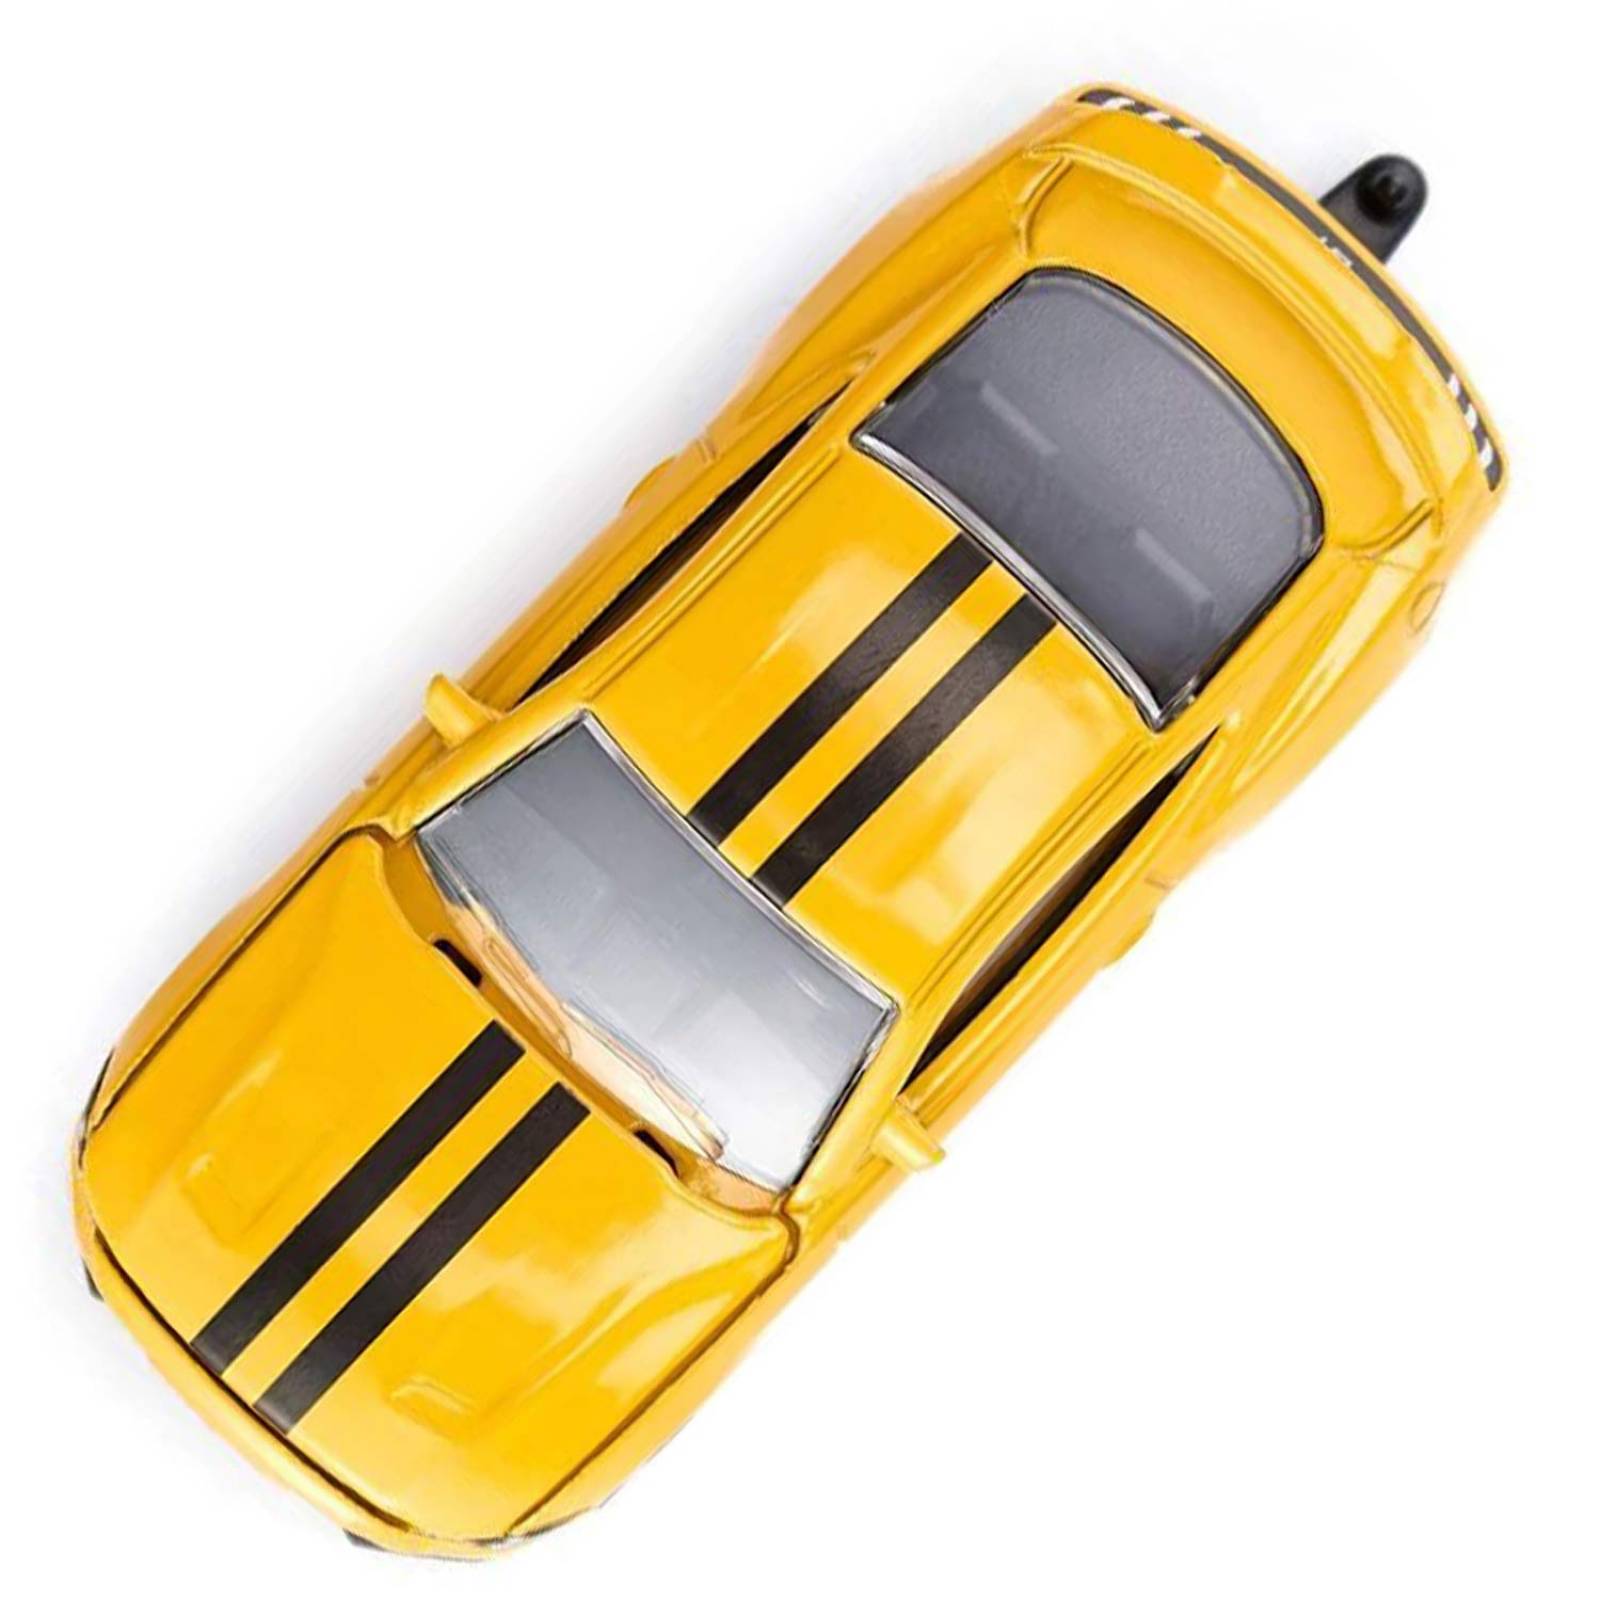 Ford Mustang GT - Single Die-Cast Toy Vehicle 1530 thumbnails